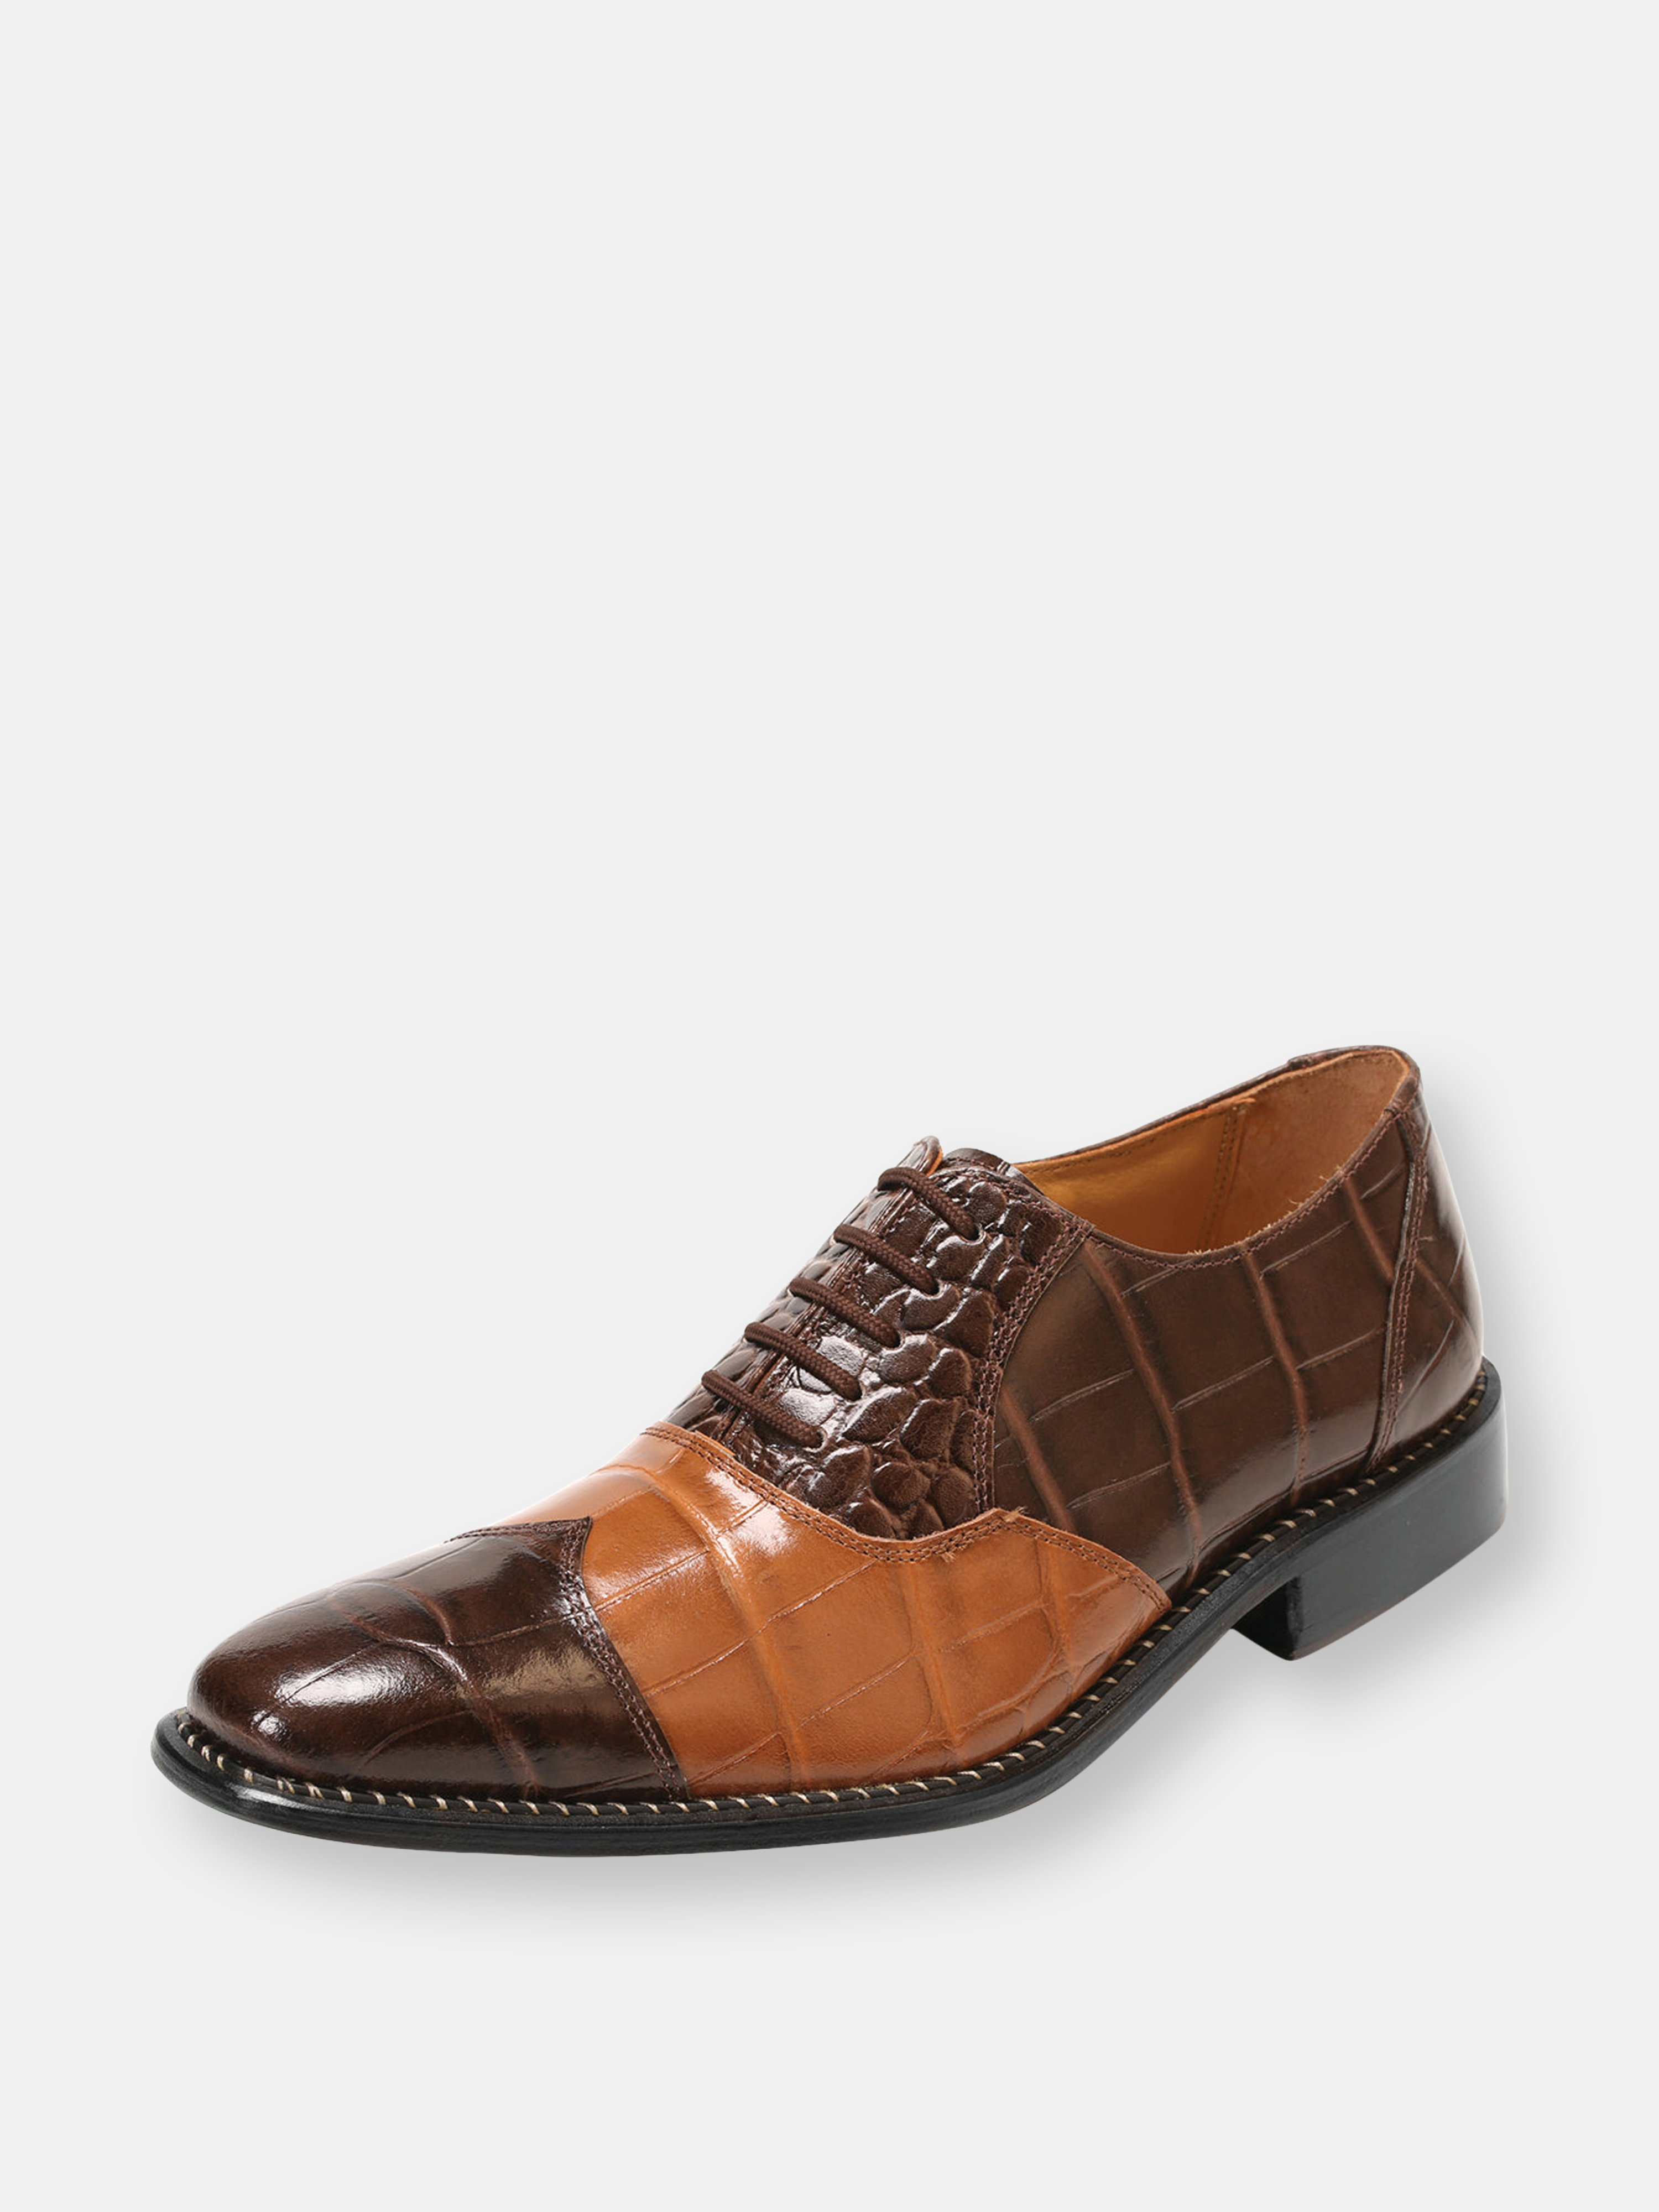 Libertyzeno Crosset Leather Oxford Style Dress Shoes In Brown